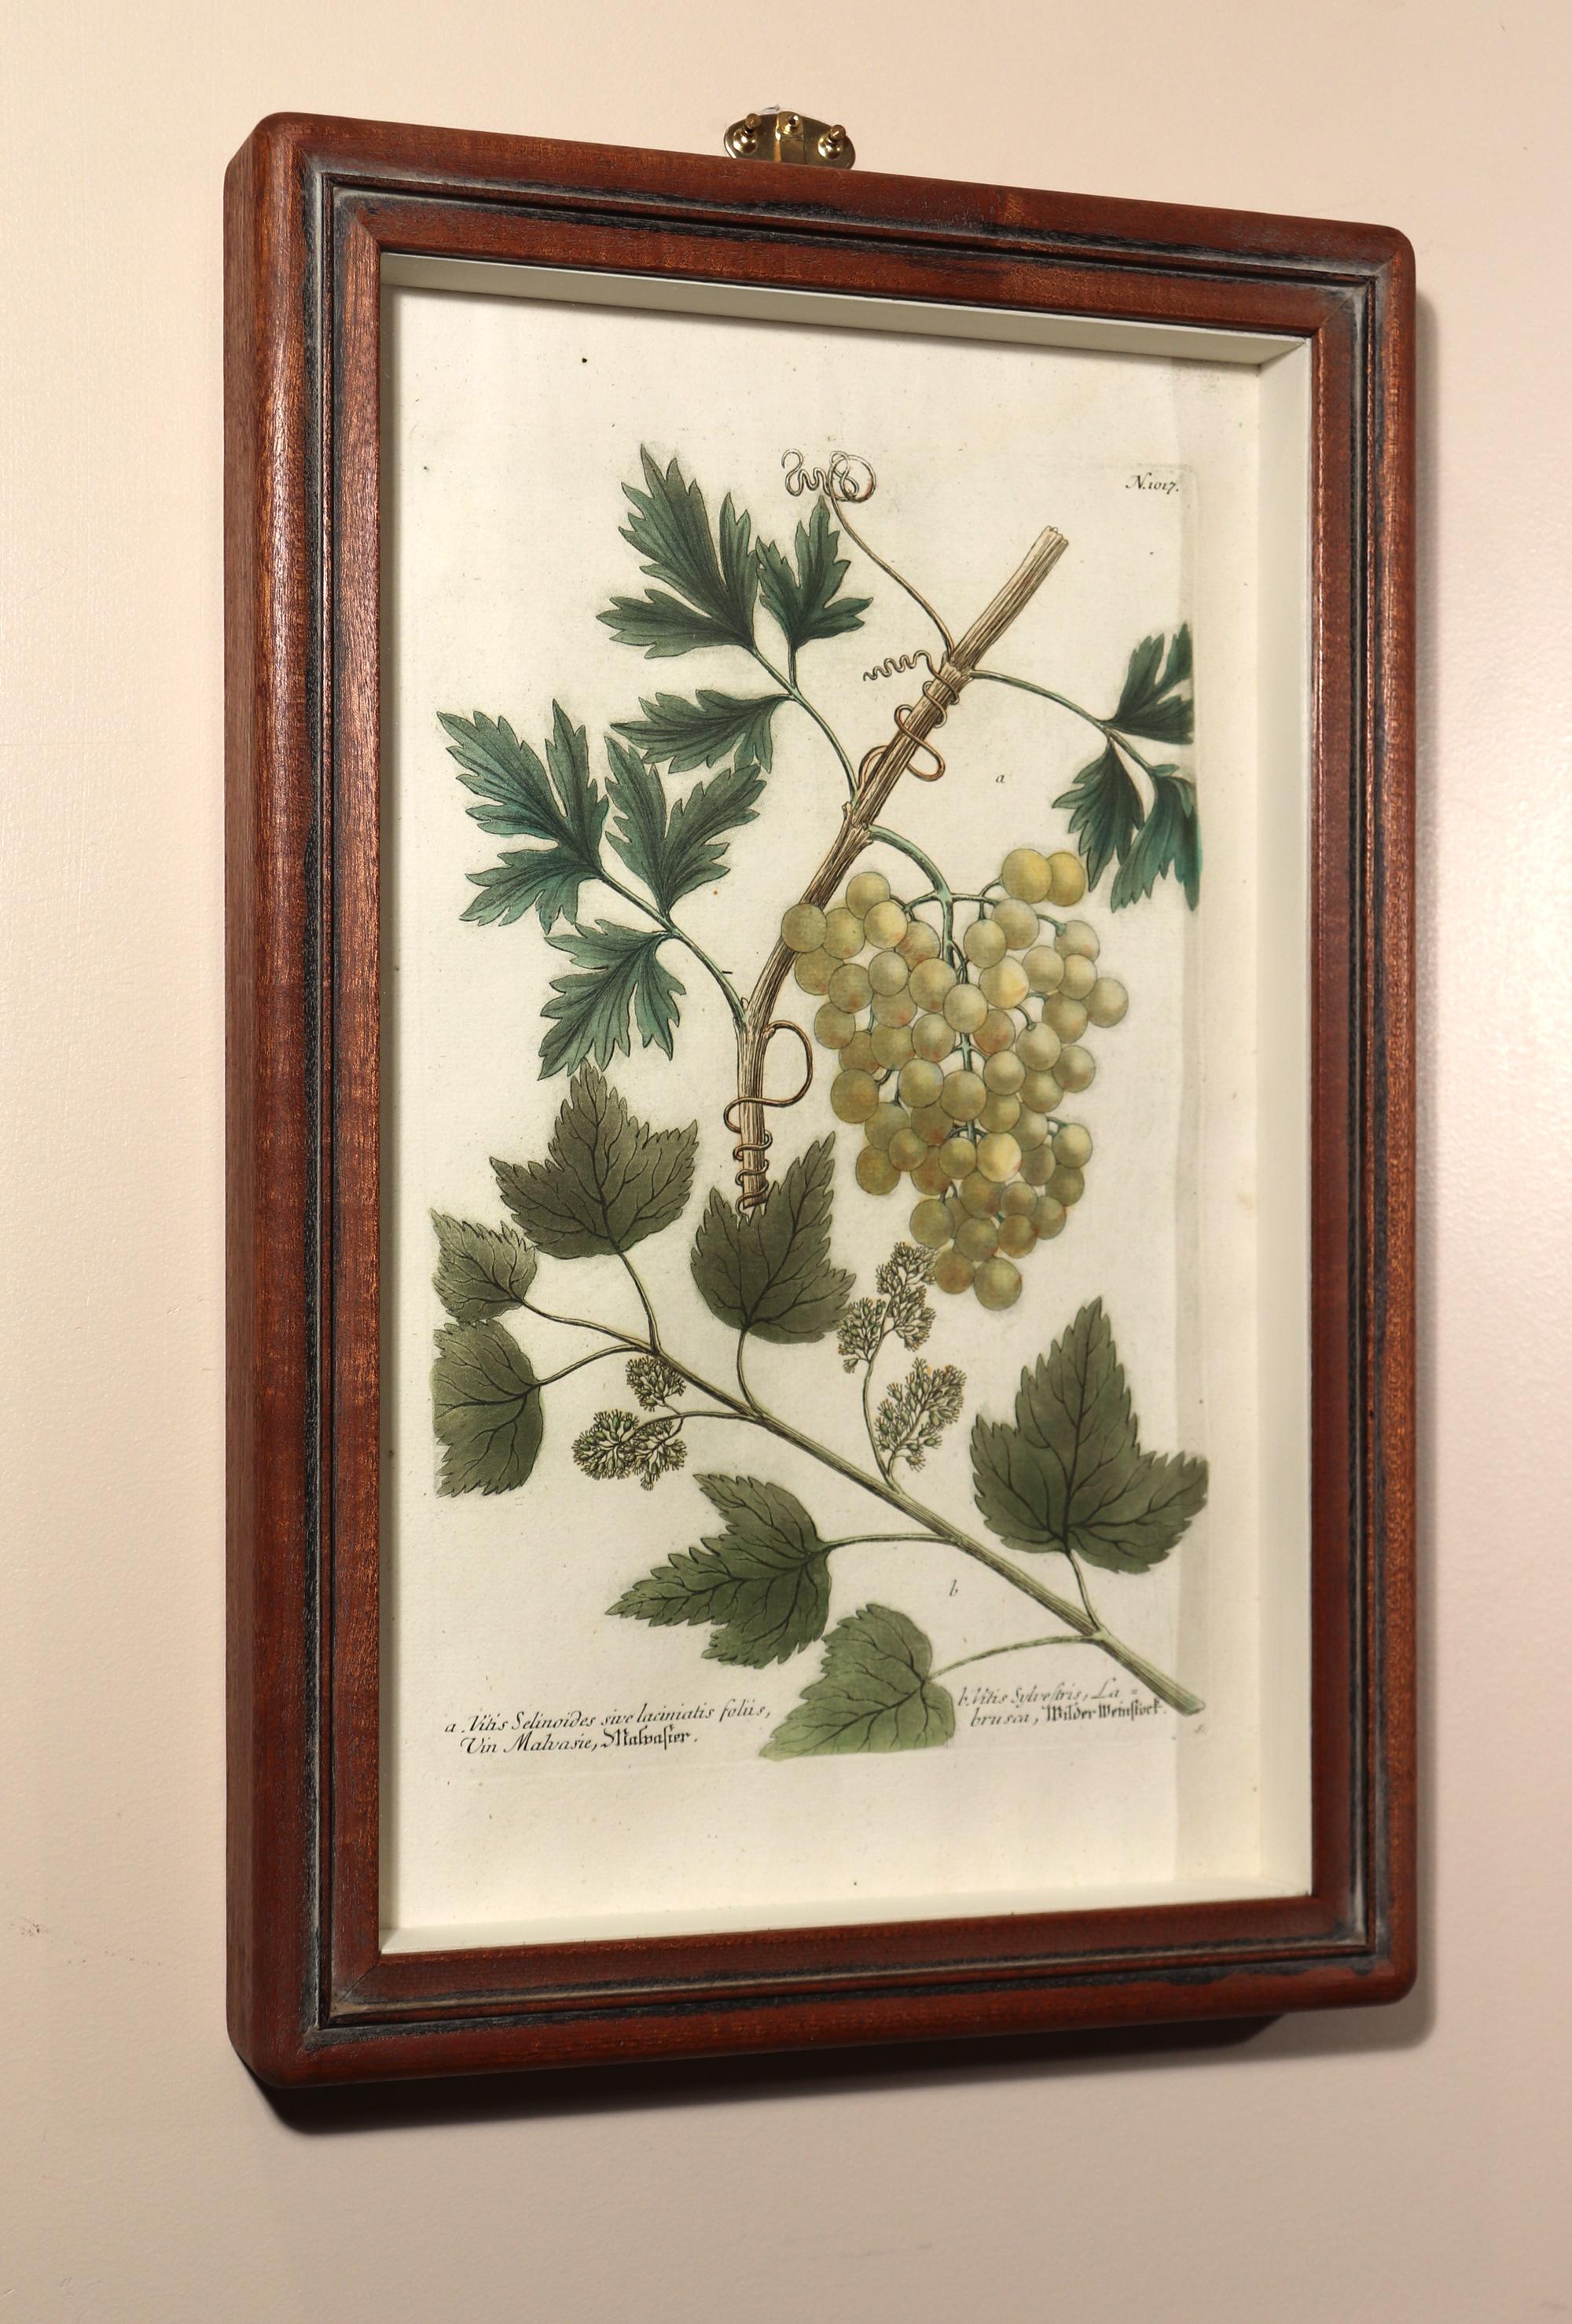 Johann Weinmann engravings of grapes,
Set of Four,
Circa 1740

Johann Weinmann engravings of grapes, each engraved by Seuter (S to the lower right of each). The engravings are within a Sapele wood shadow box with rouded corners.

The Johann